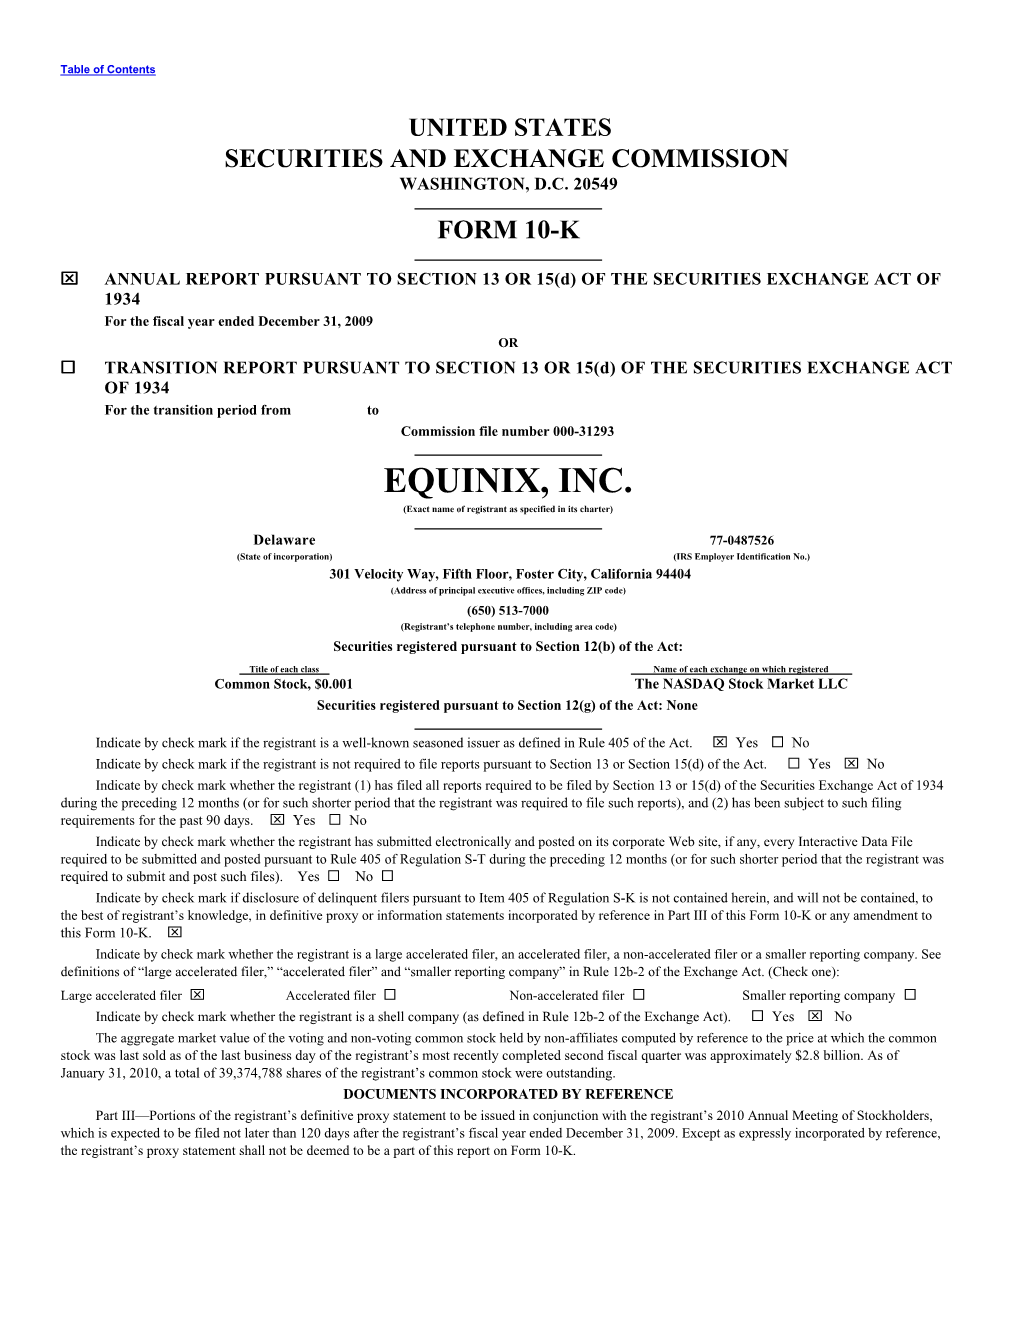 EQUINIX, INC. (Exact Name of Registrant As Specified in Its Charter)